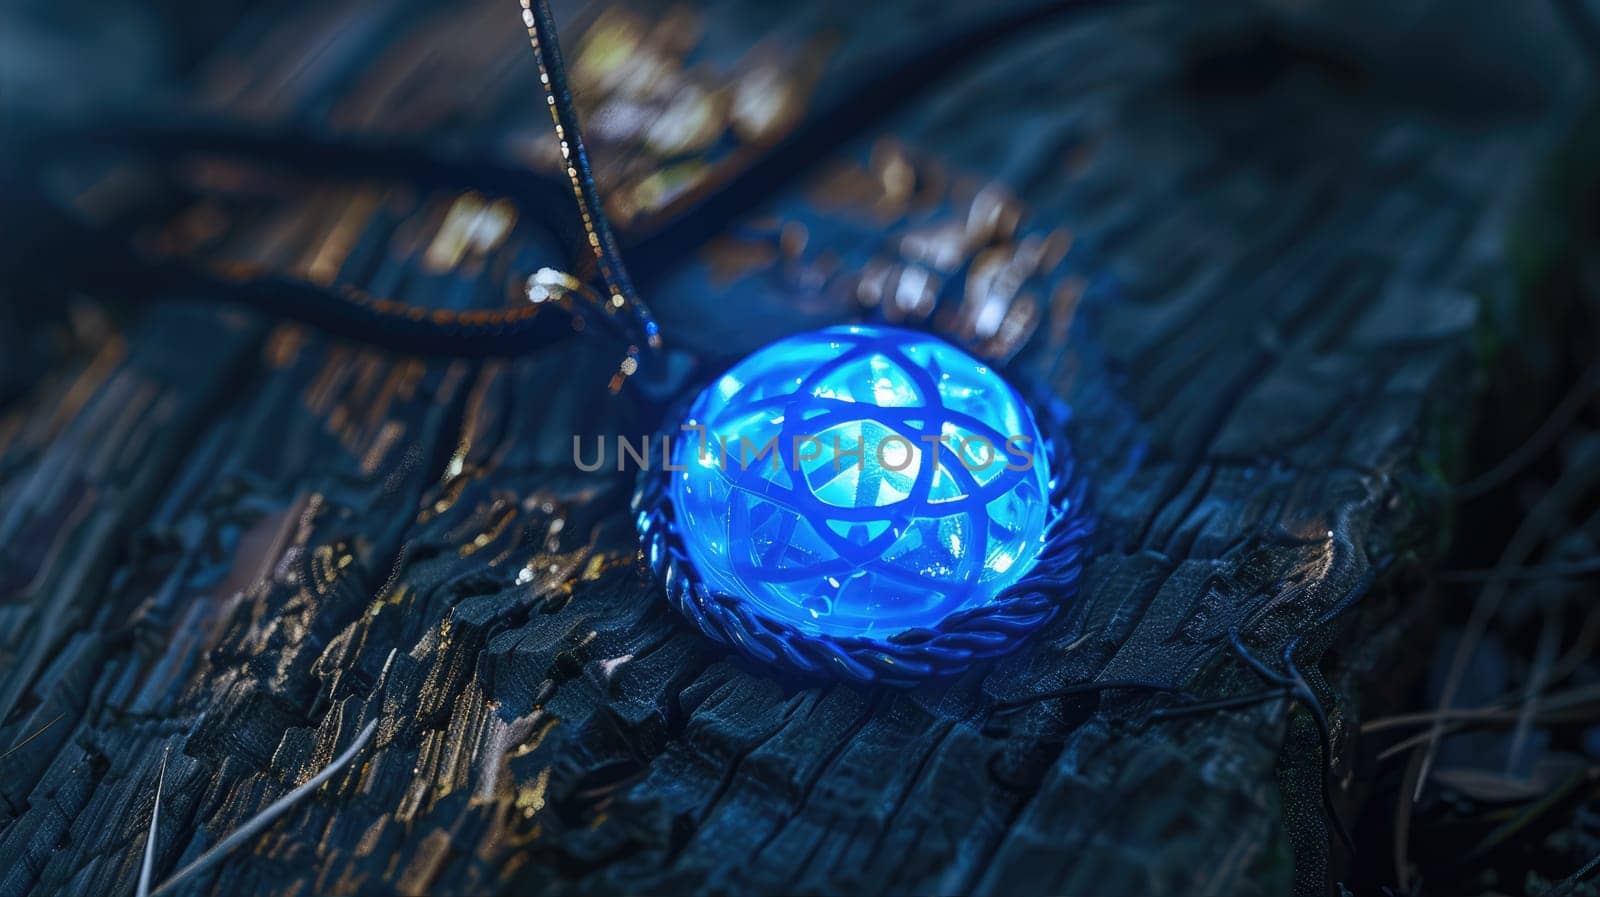 The amulet for protection against dark forces and negativity. Magical glow effect AI